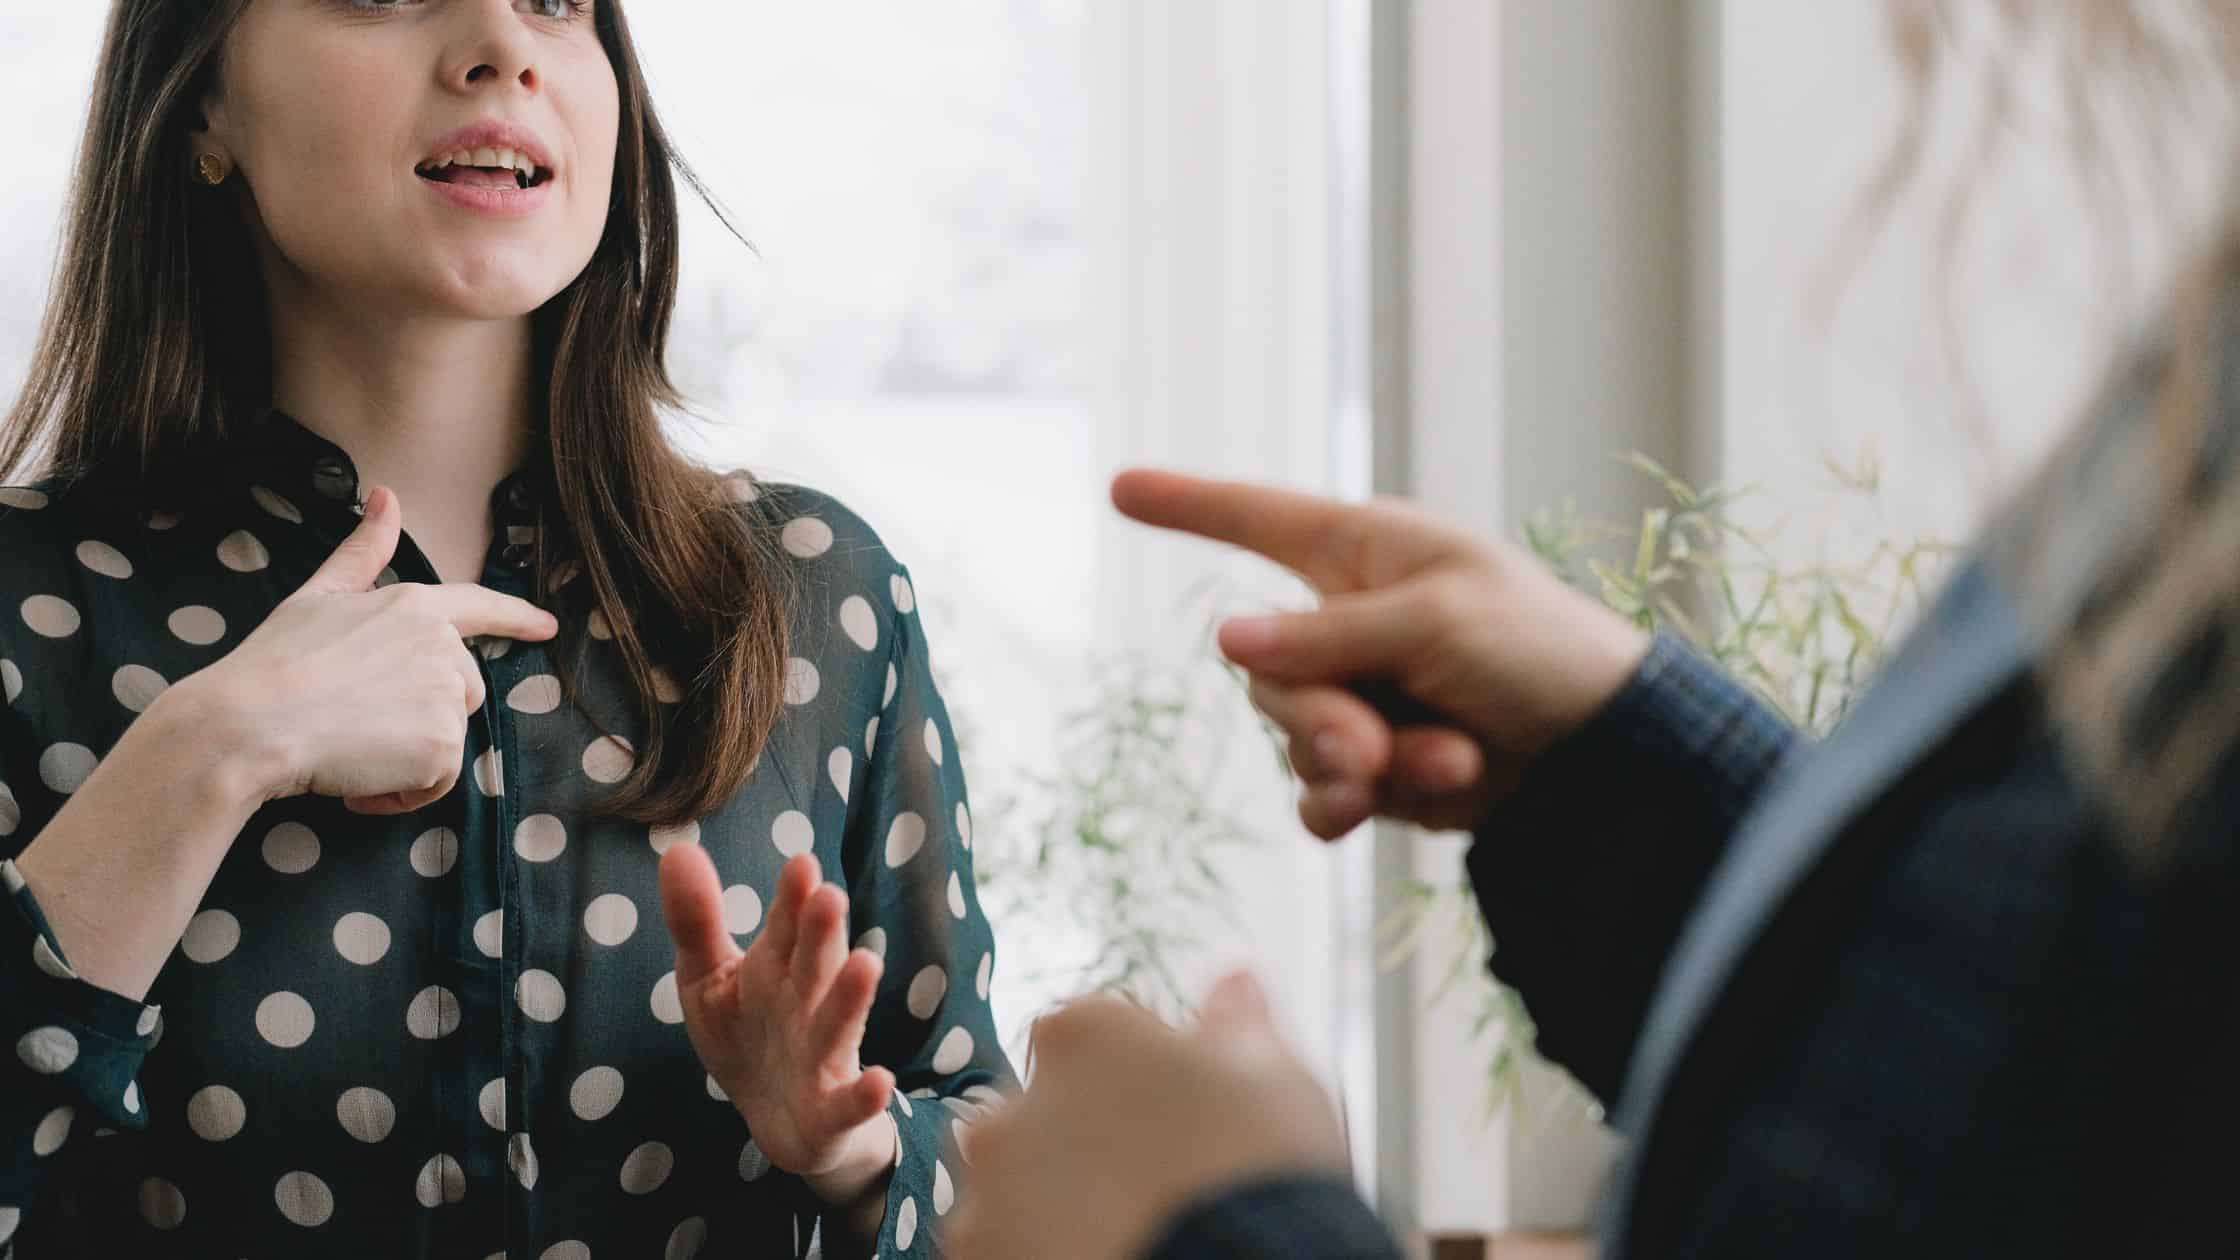 Gain the confidence to disagree with your boss without burning bridges. My guide offers 13 essential phrases to use when you disagree with your boss.